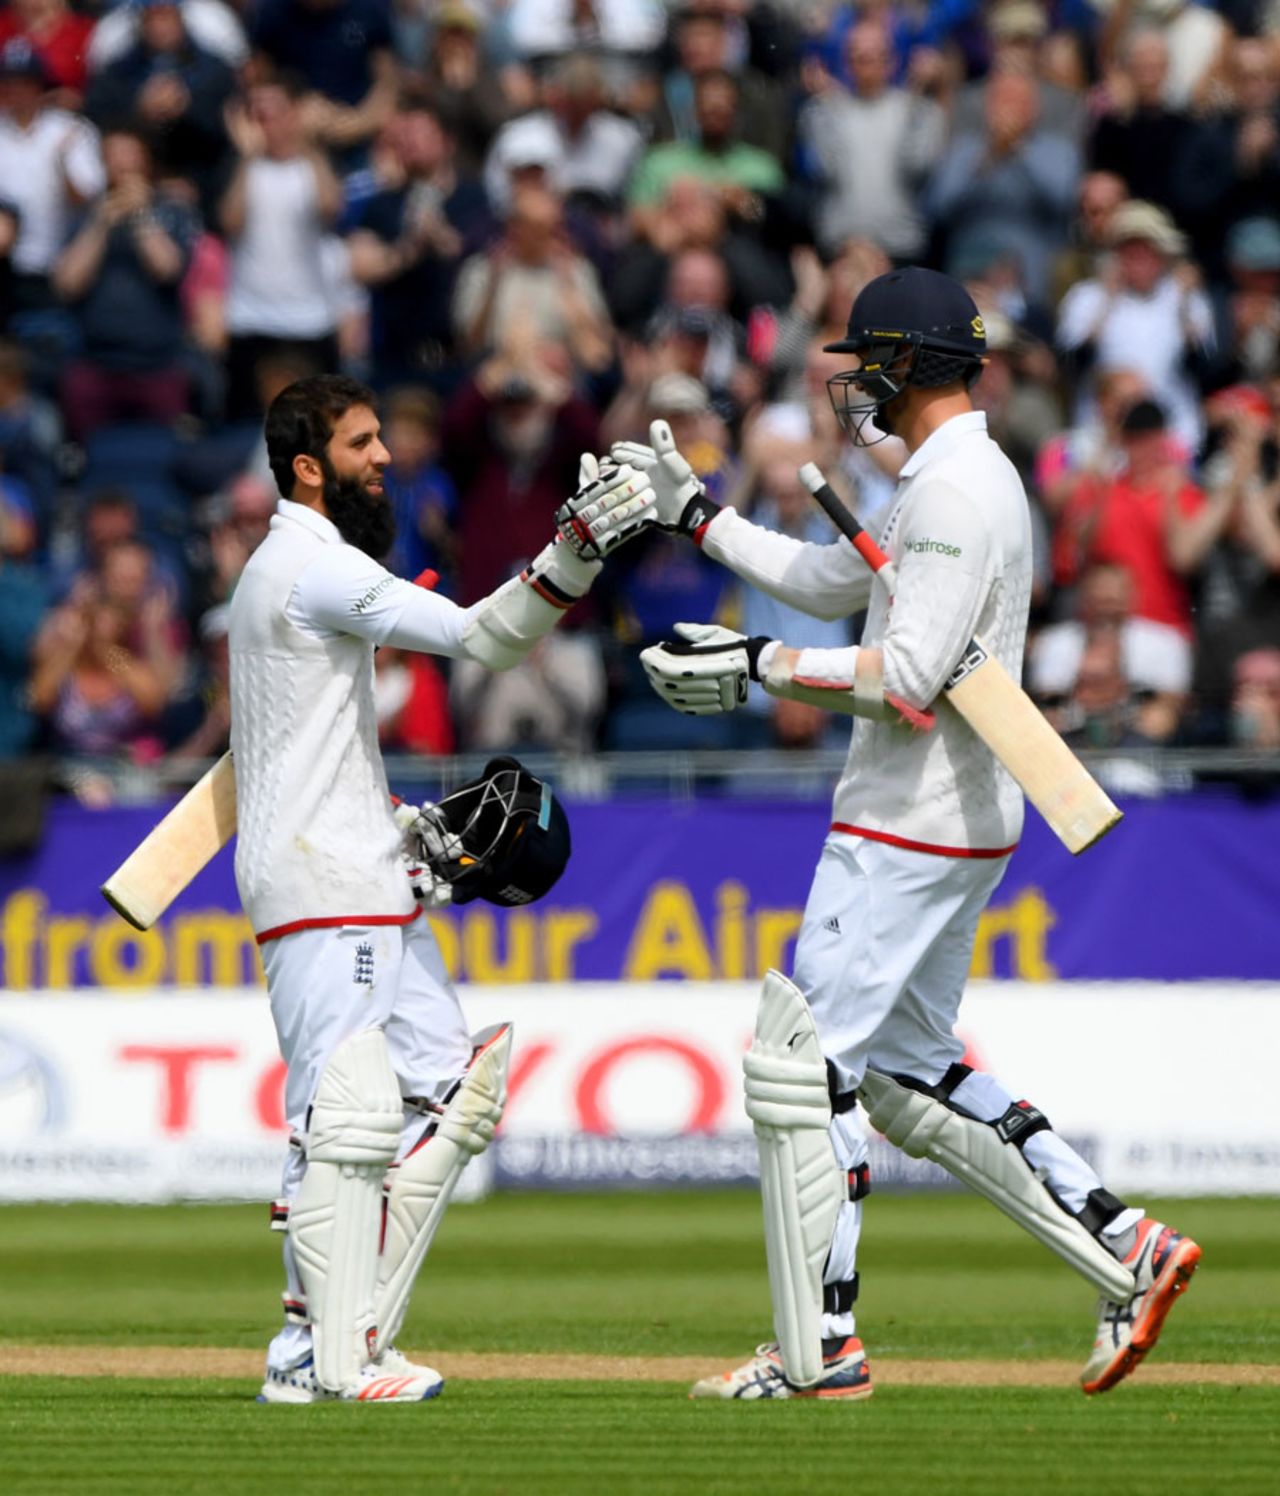 Moeen Ali celebrates his second Test century with Steven Finn, England v Sri Lanka, 2nd Test, Chester-le-Street, 2nd day, May 28, 2016